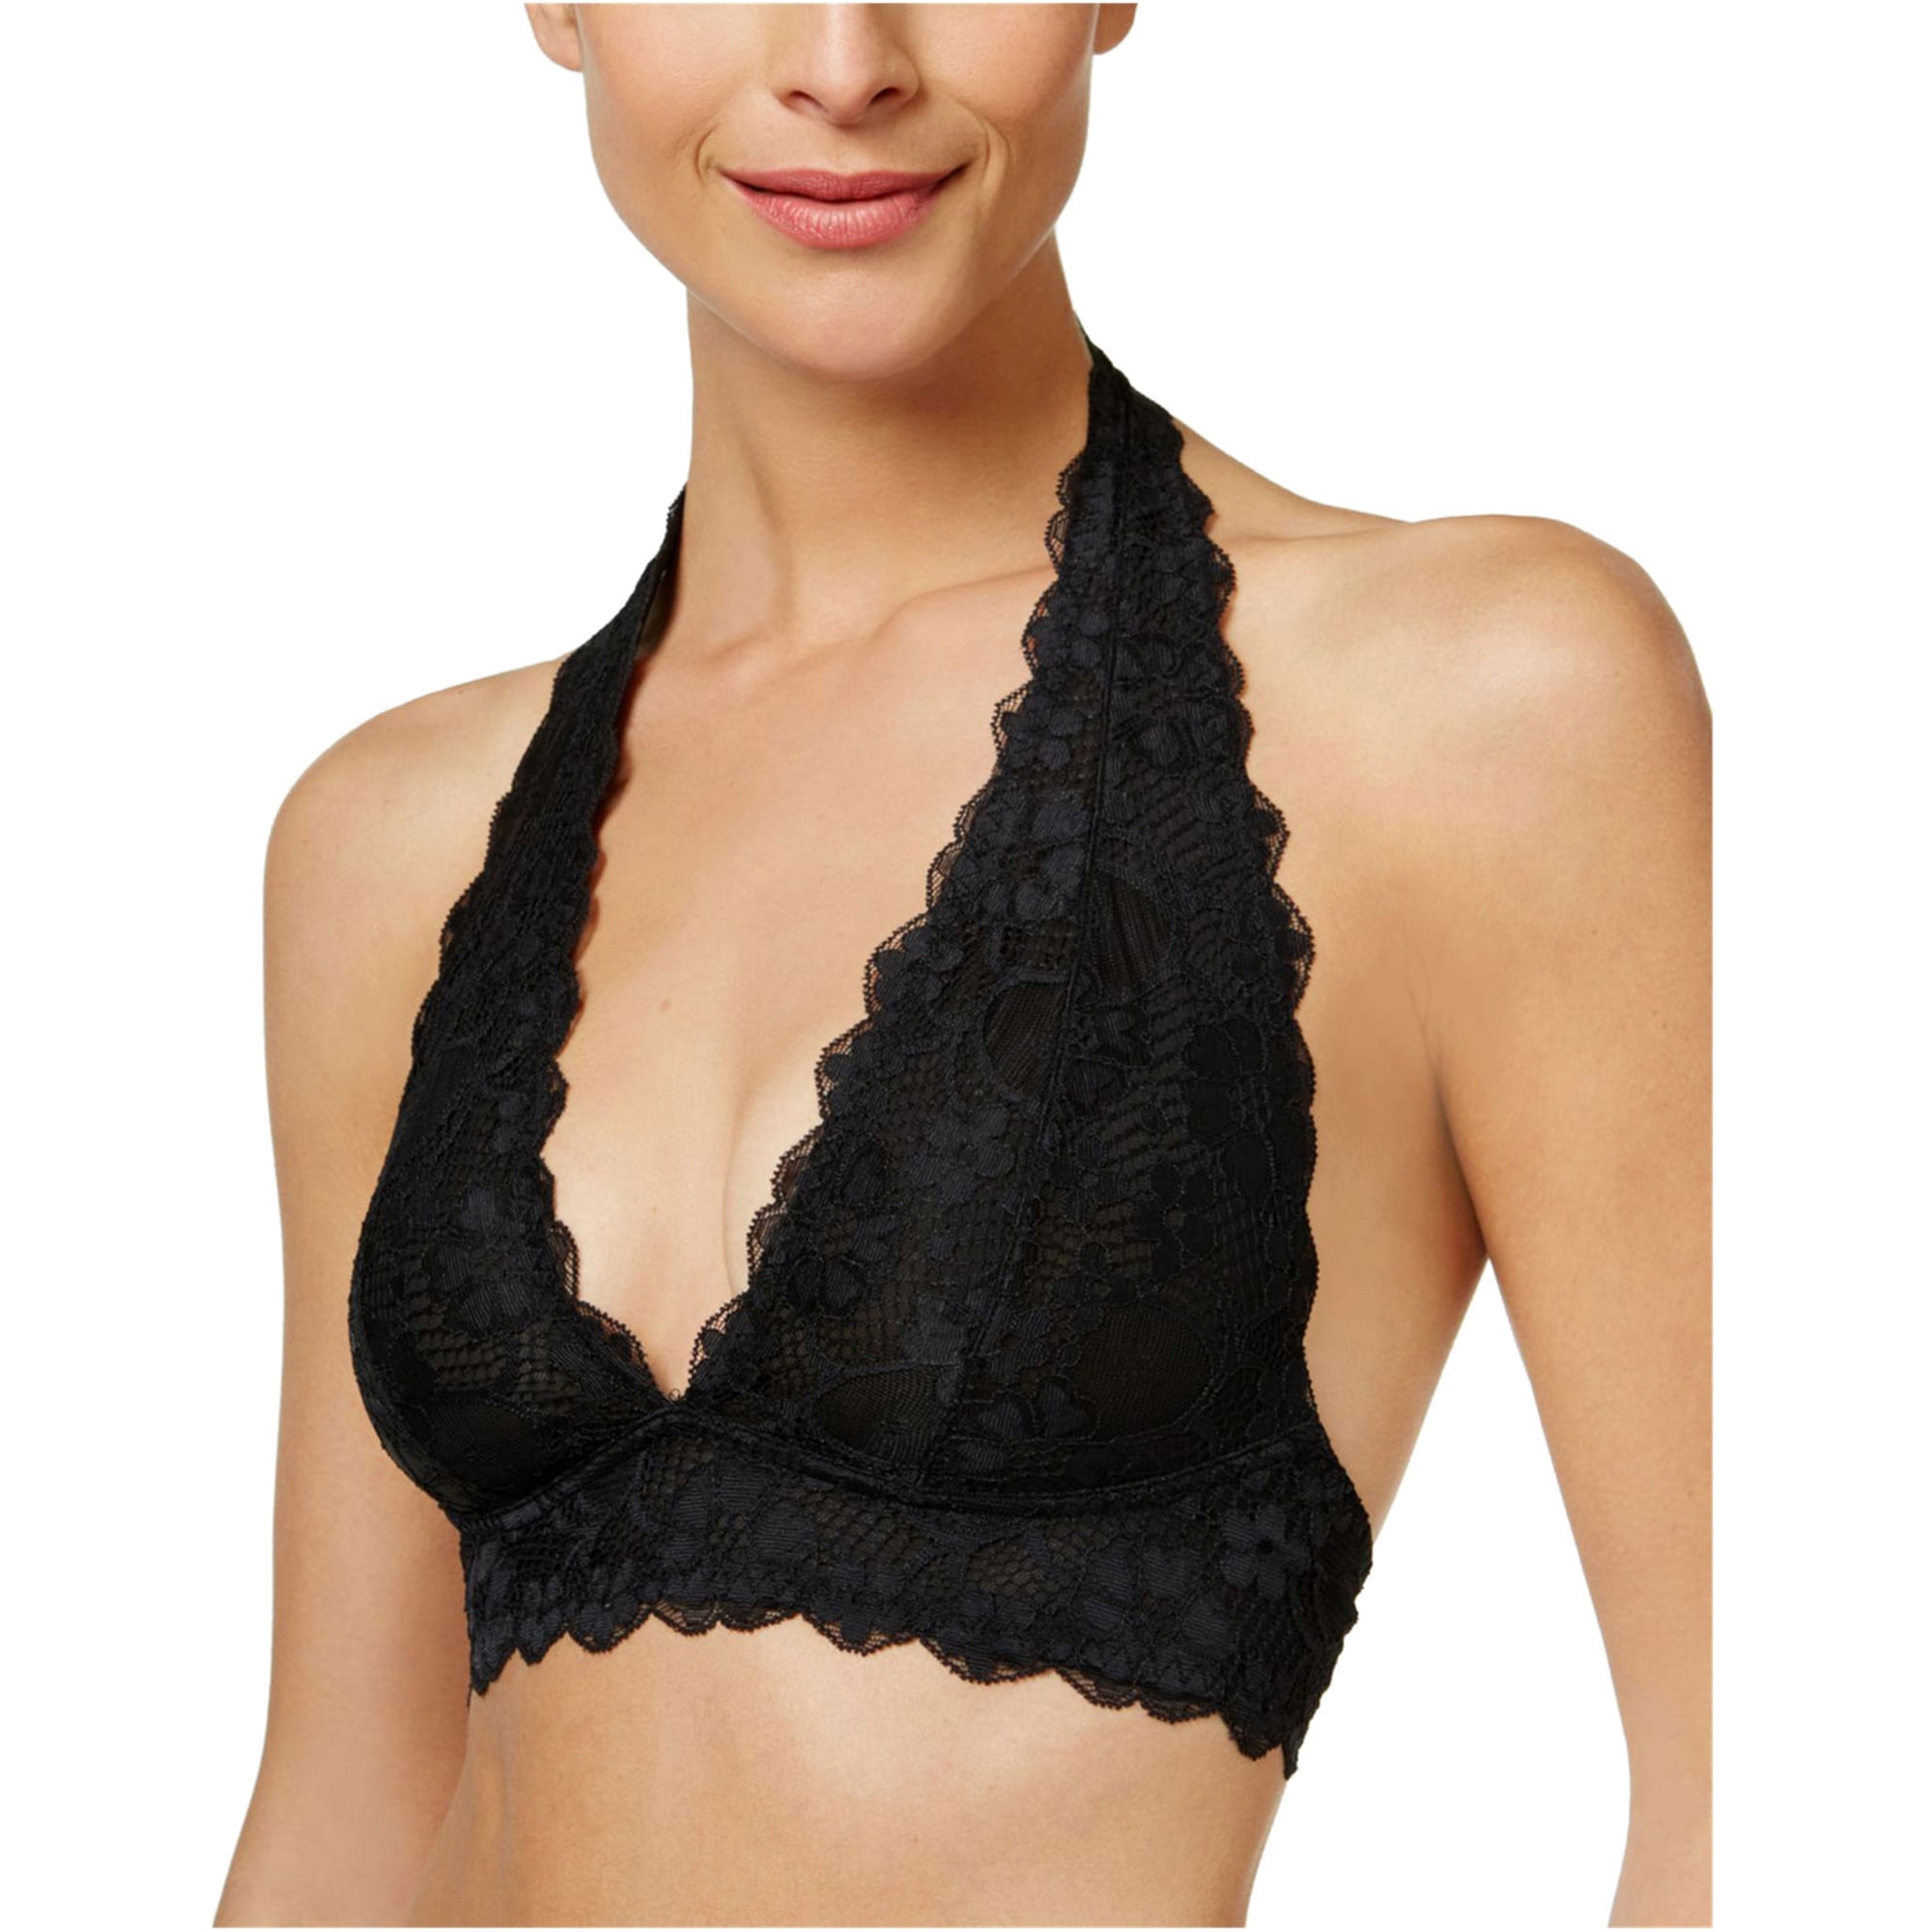 Intimately Free People Women's Galloon Lace Halter Bralette Black